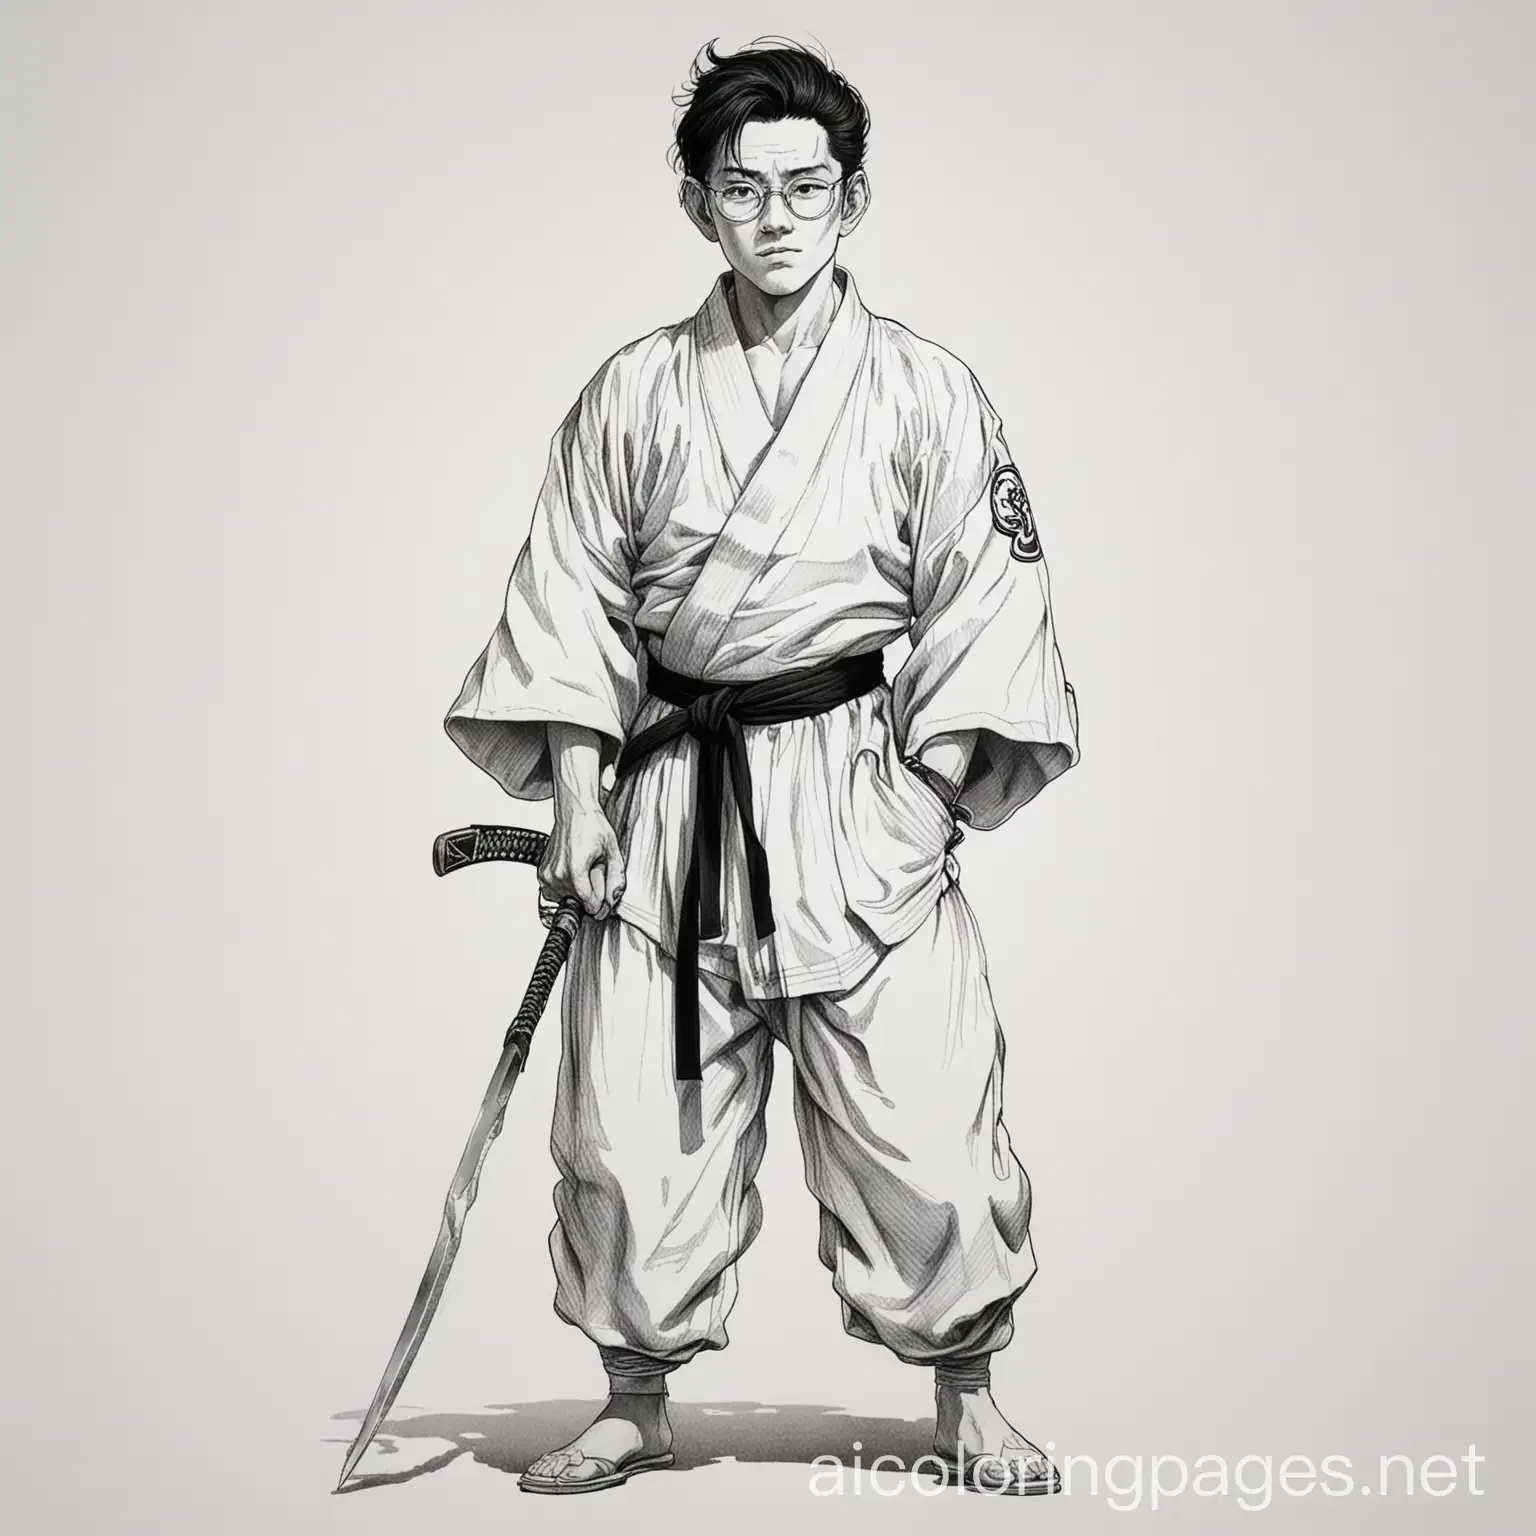 Satoru Gojo, Coloring Page, black and white, line art, white background, Simplicity, Ample White Space. The background of the coloring page is plain white to make it easy for young children to color within the lines. The outlines of all the subjects are easy to distinguish, making it simple for kids to color without too much difficulty